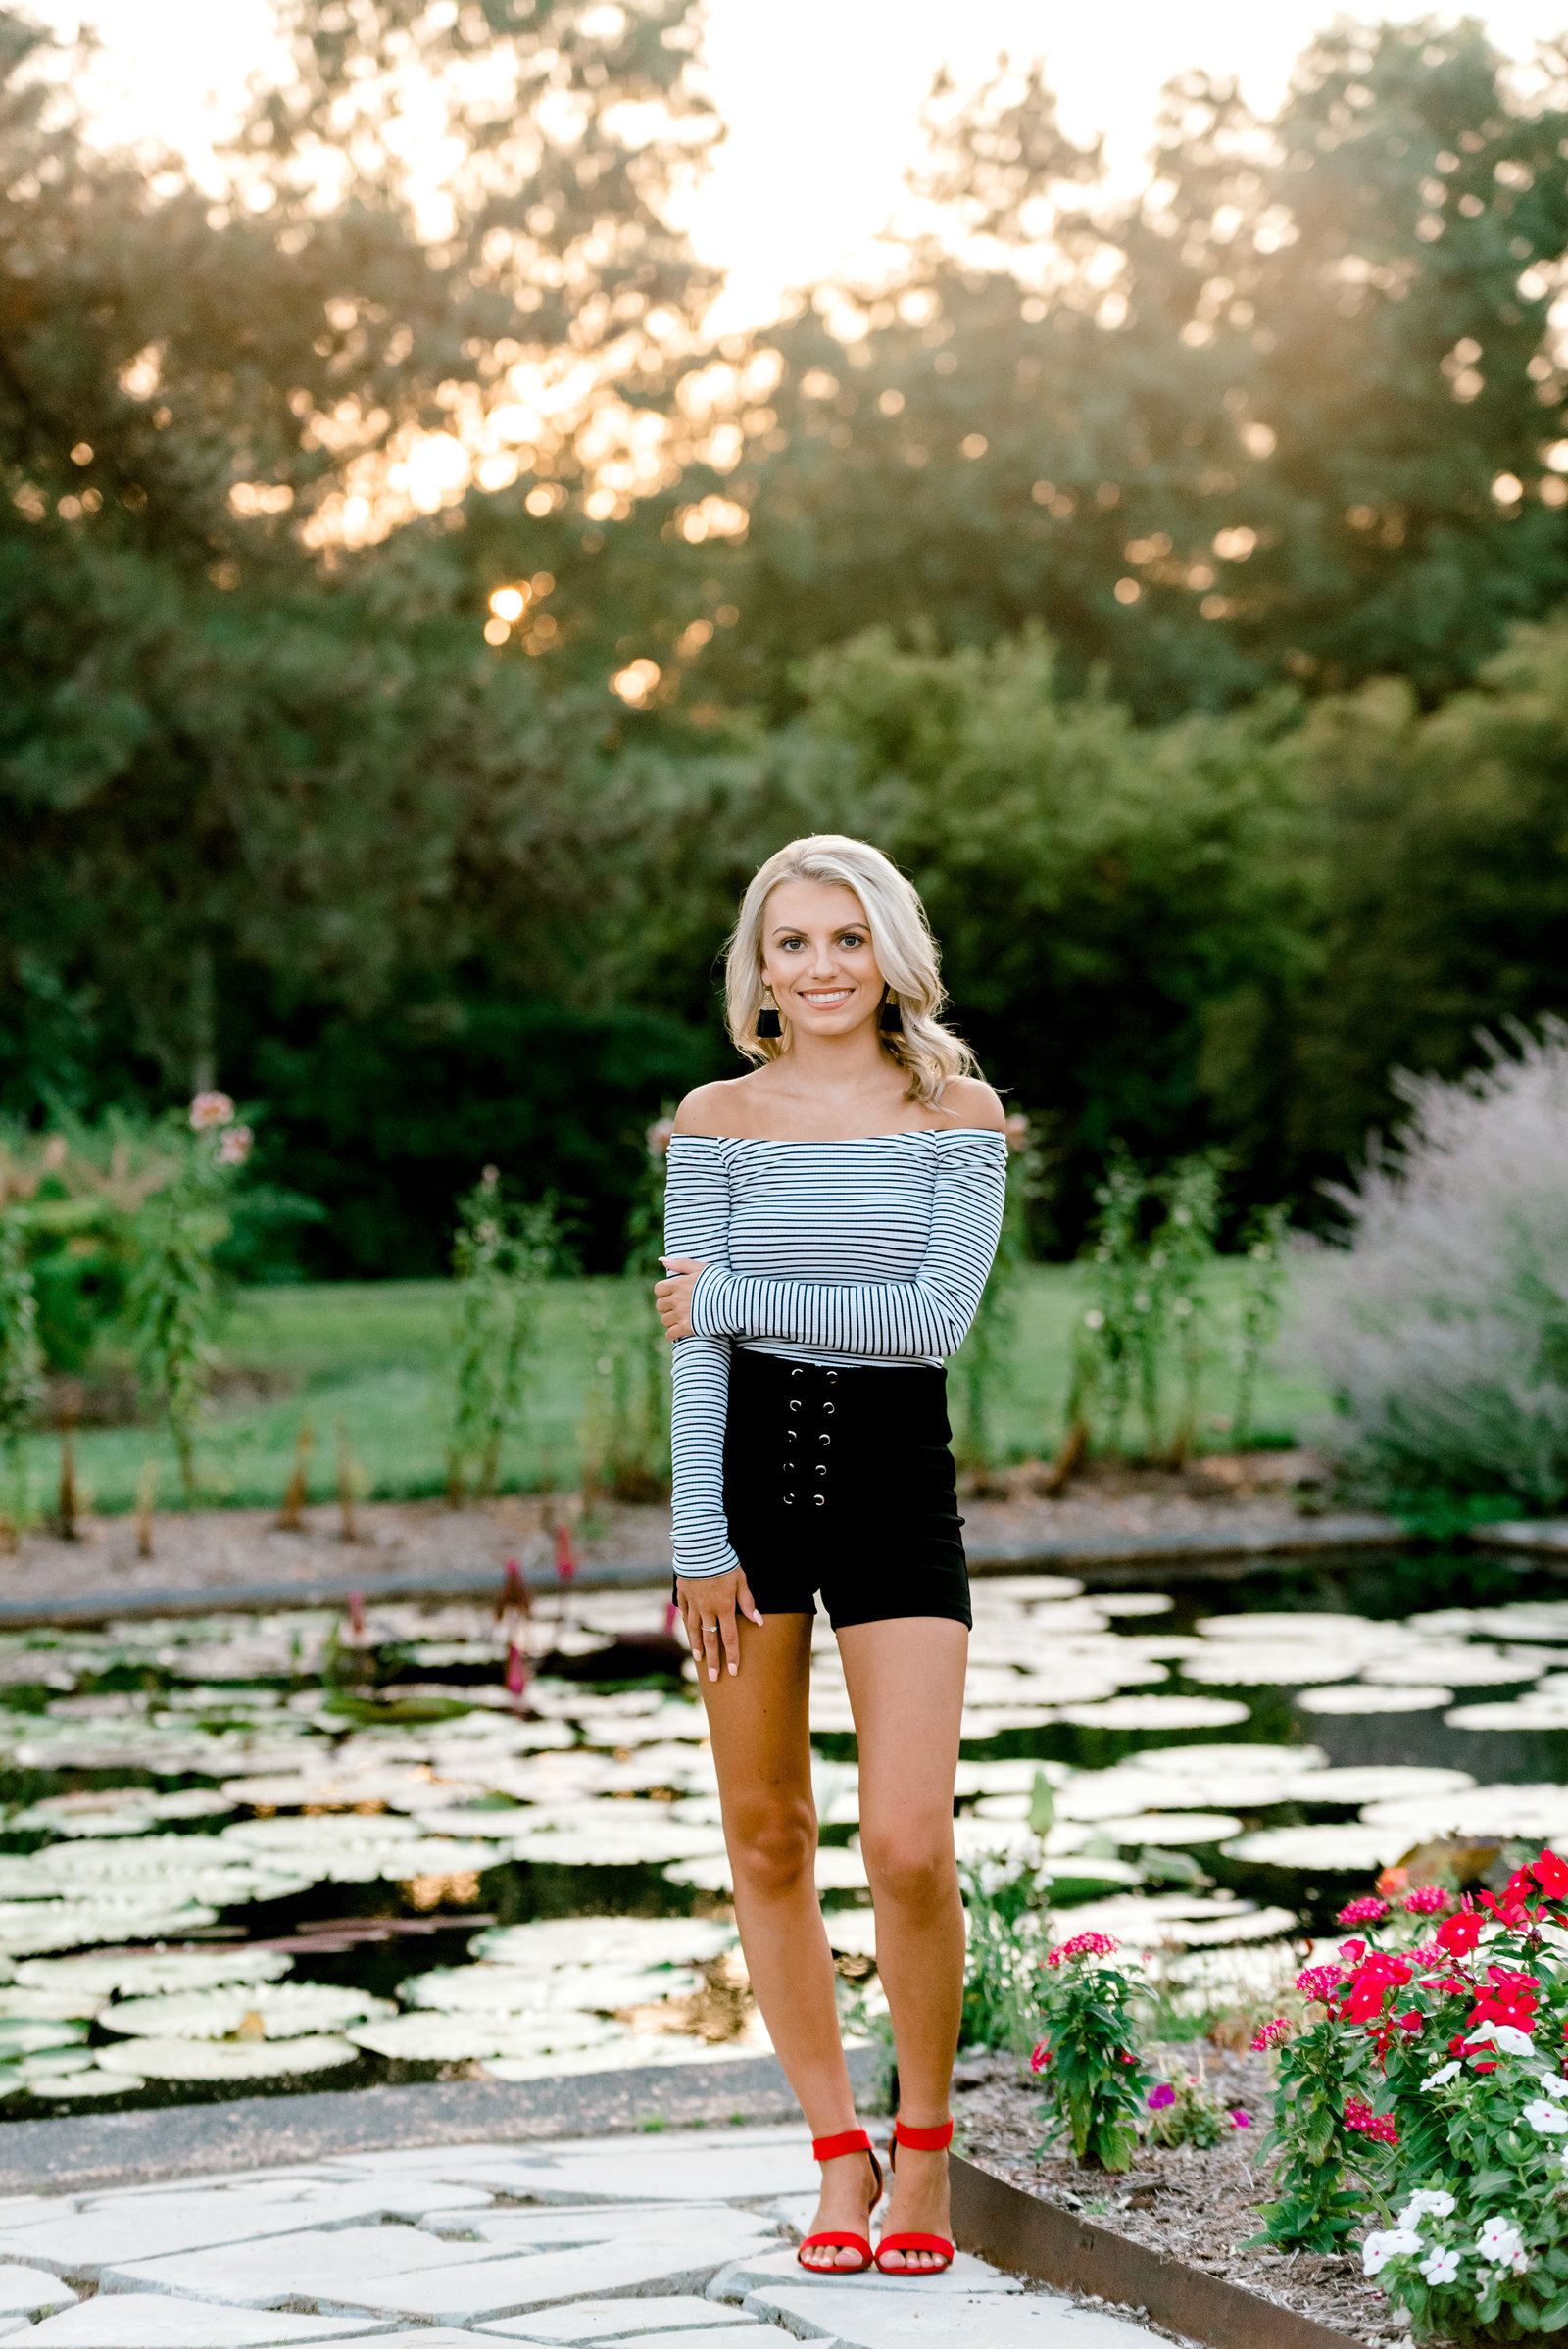 Senior picture with lily pads